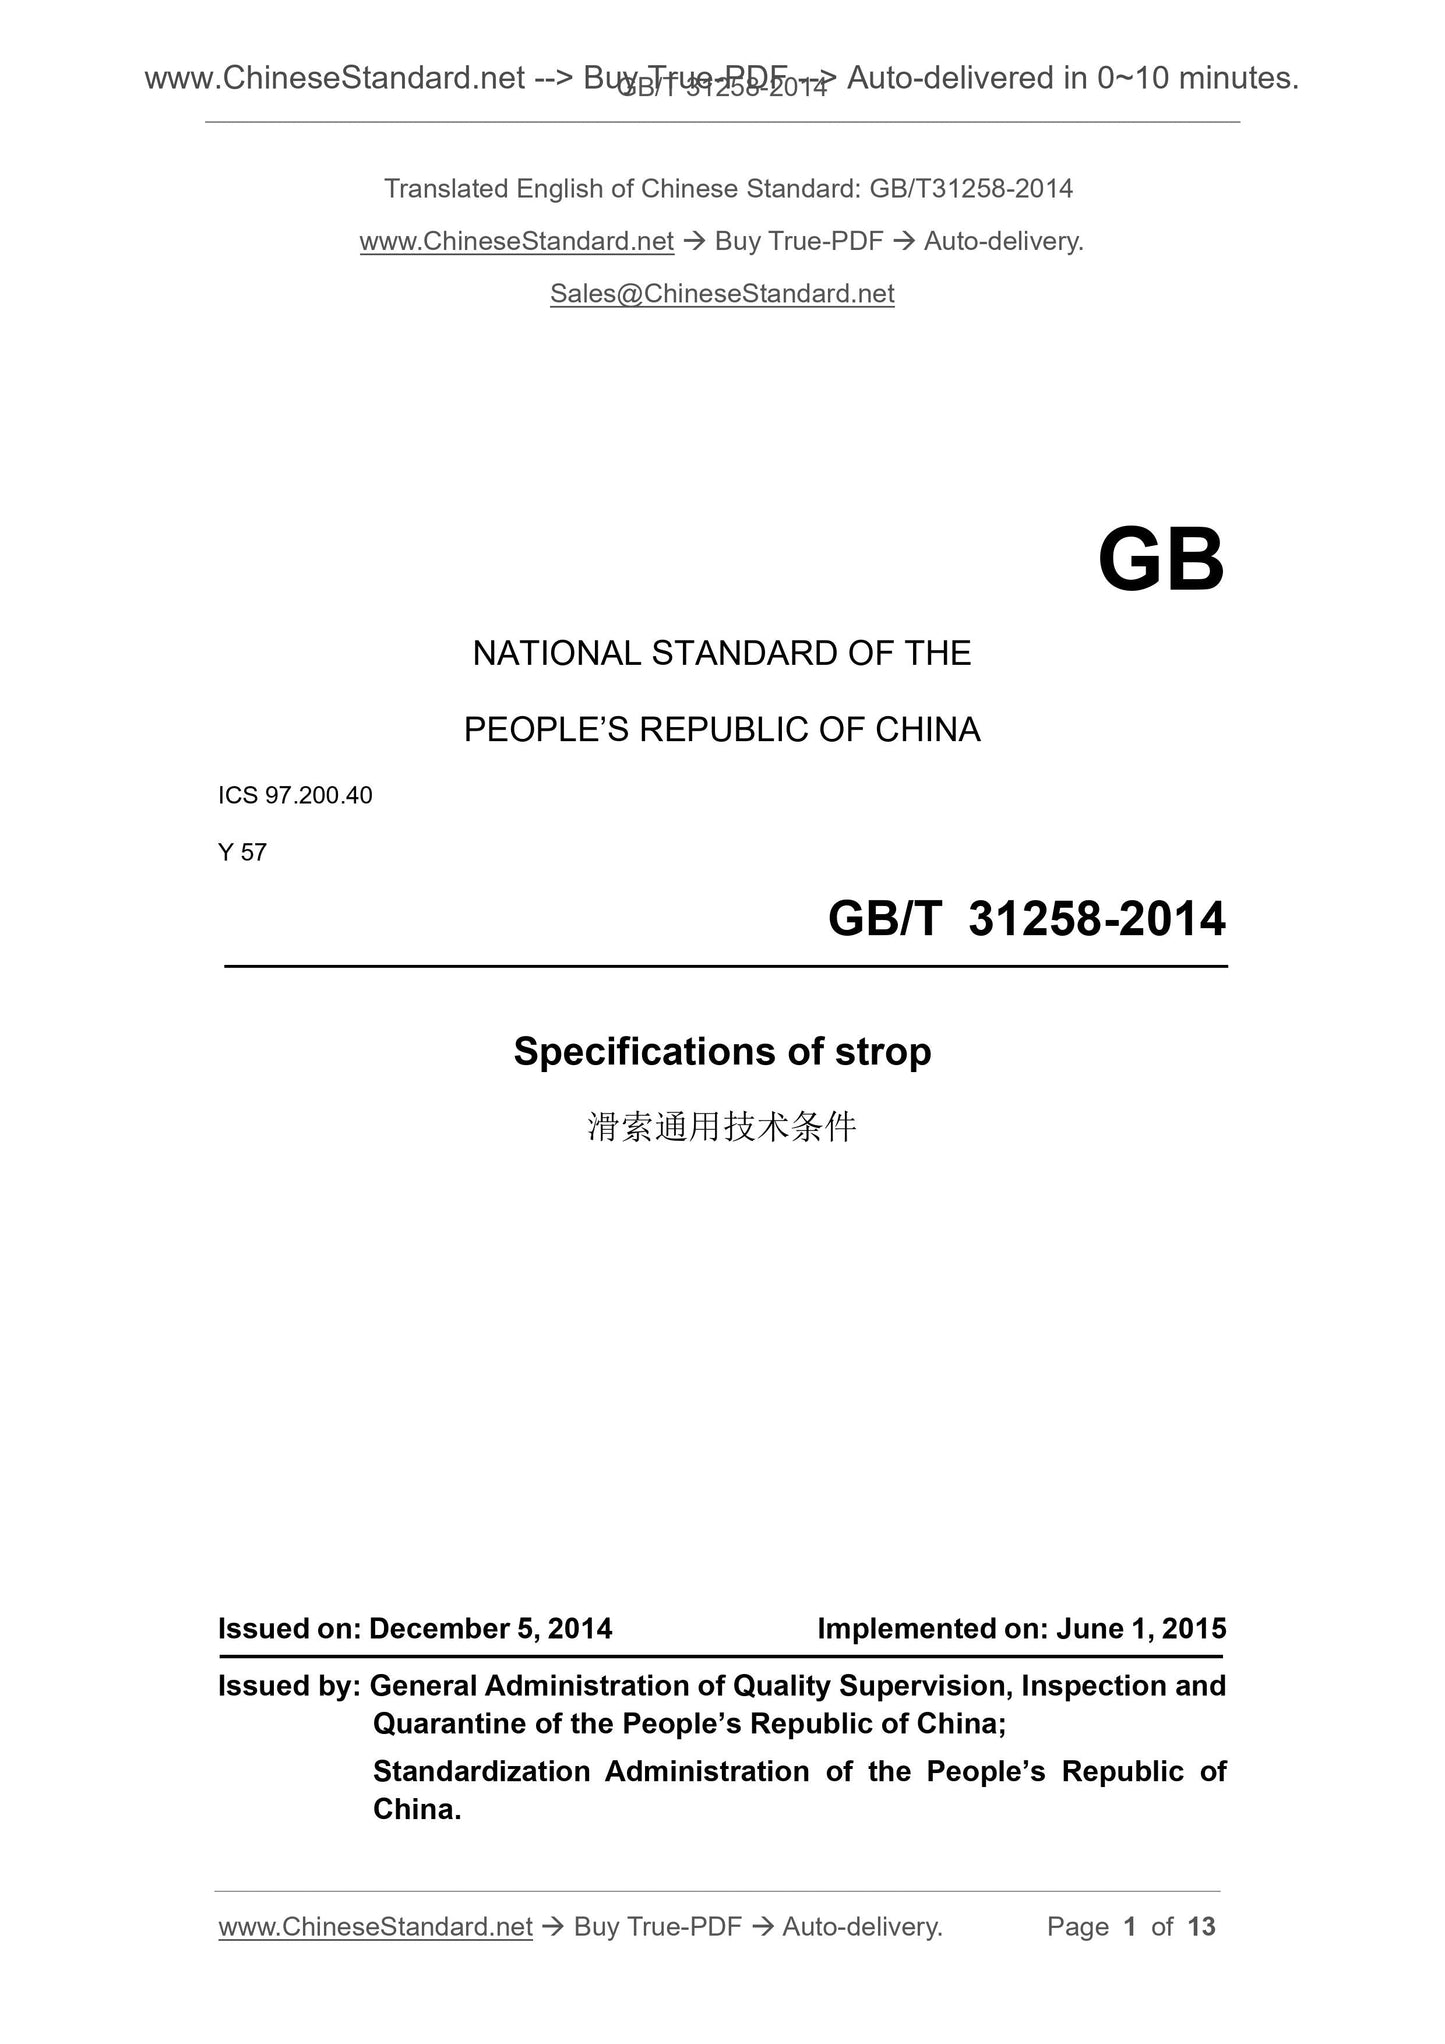 GB/T 31258-2014 Page 1